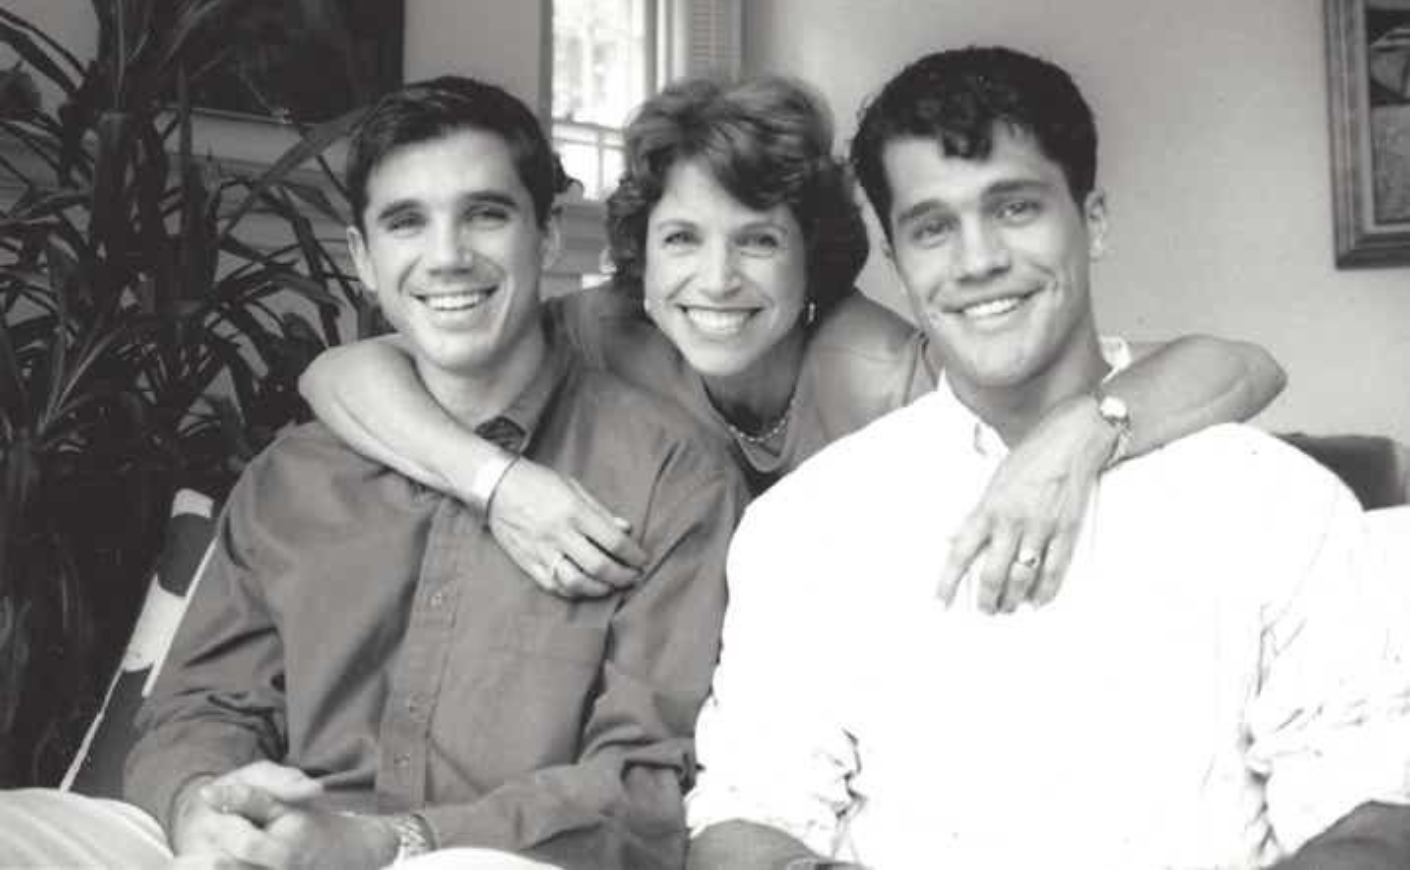 From left to right: Ray Wadlow, Emily Couric, and his brother Jeff Wadlow